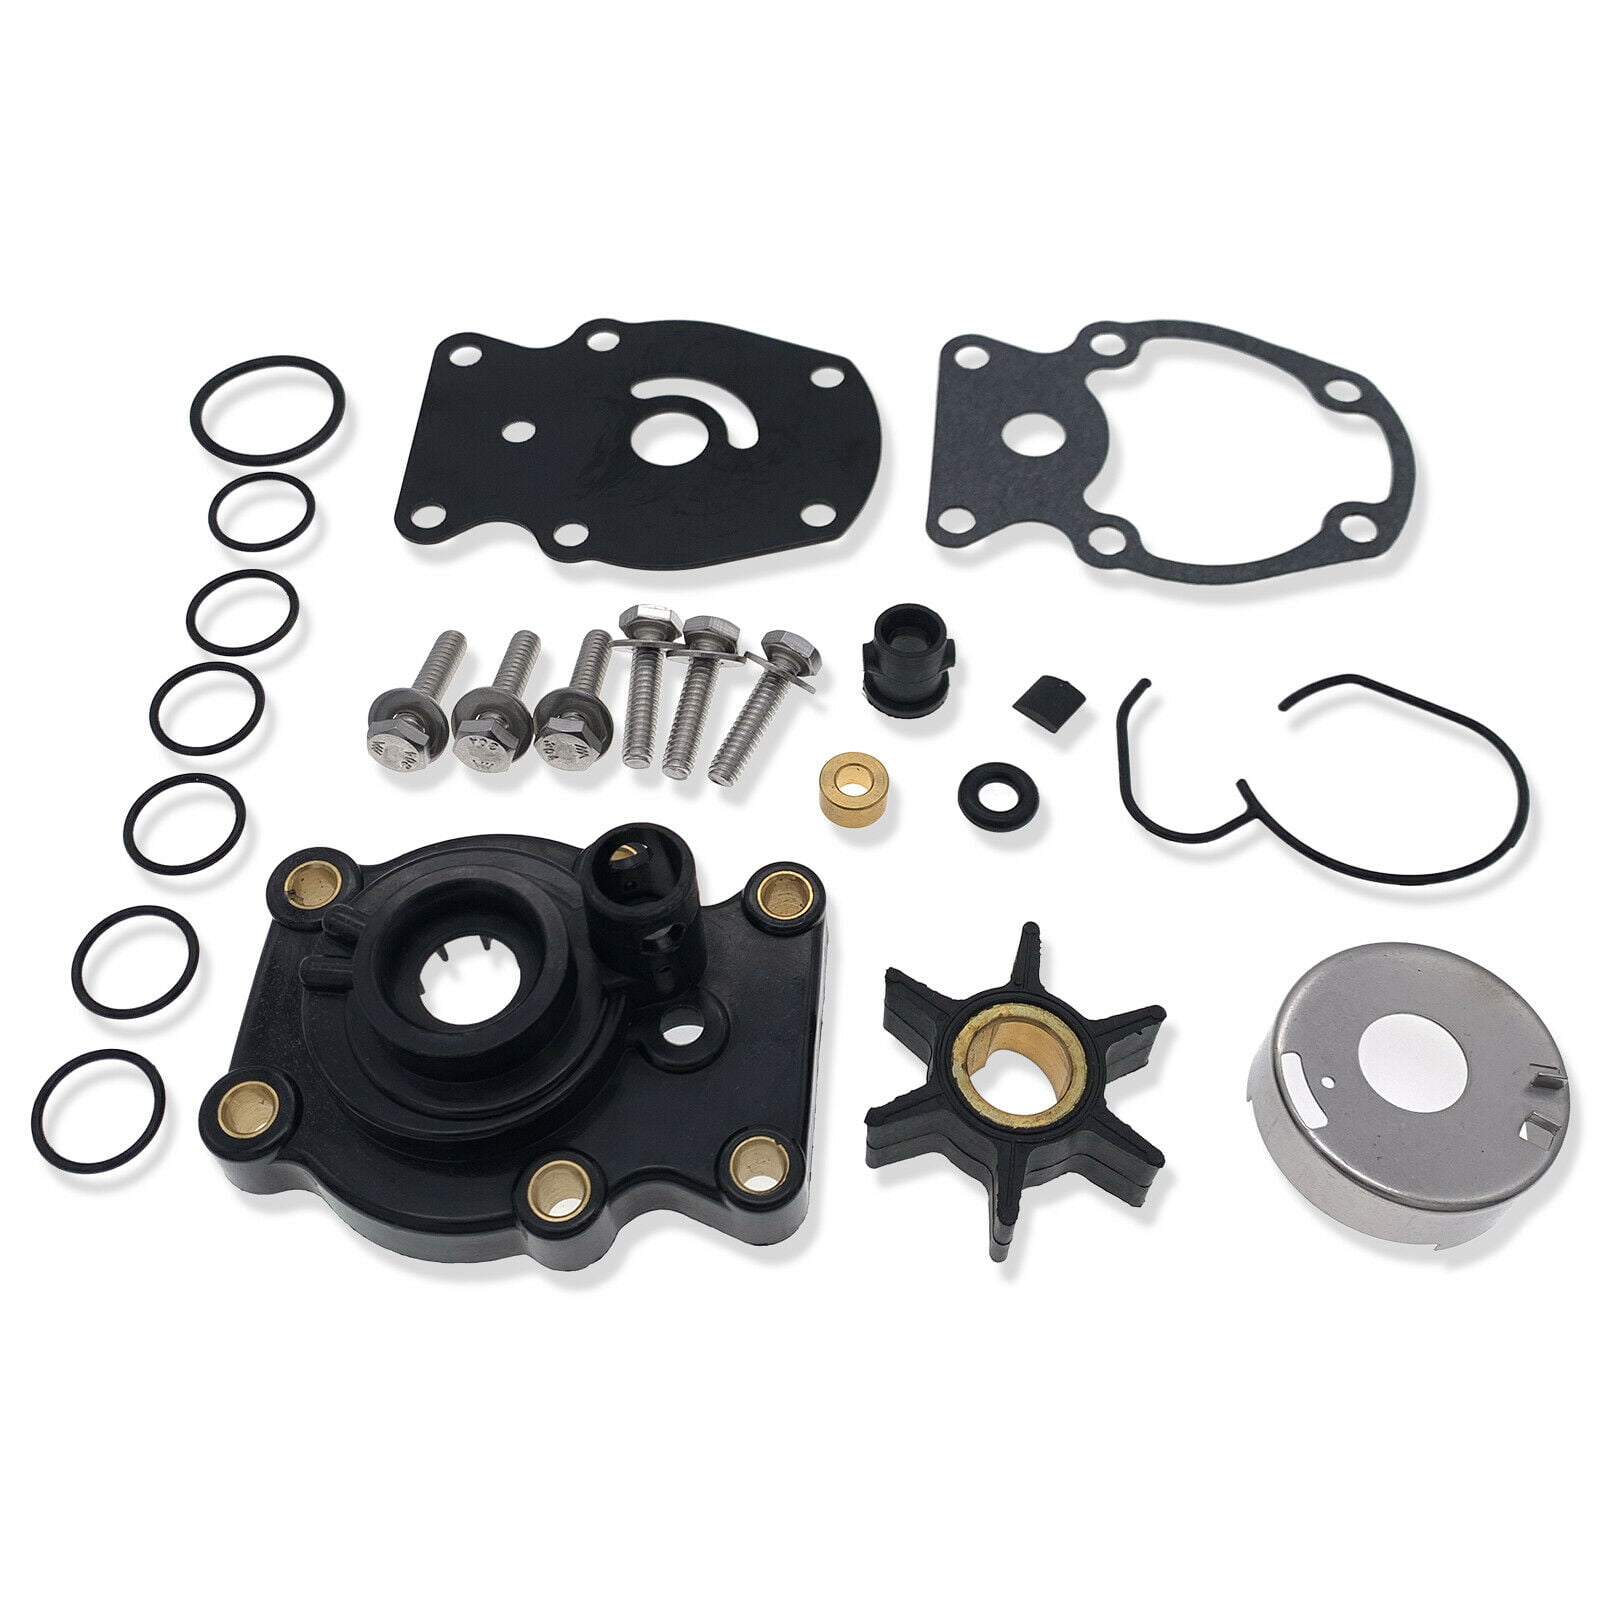 Water Pump Kit for Johnson Evinrude OMC 20 25 30 35 HP Outboard Boat Motor Parts 